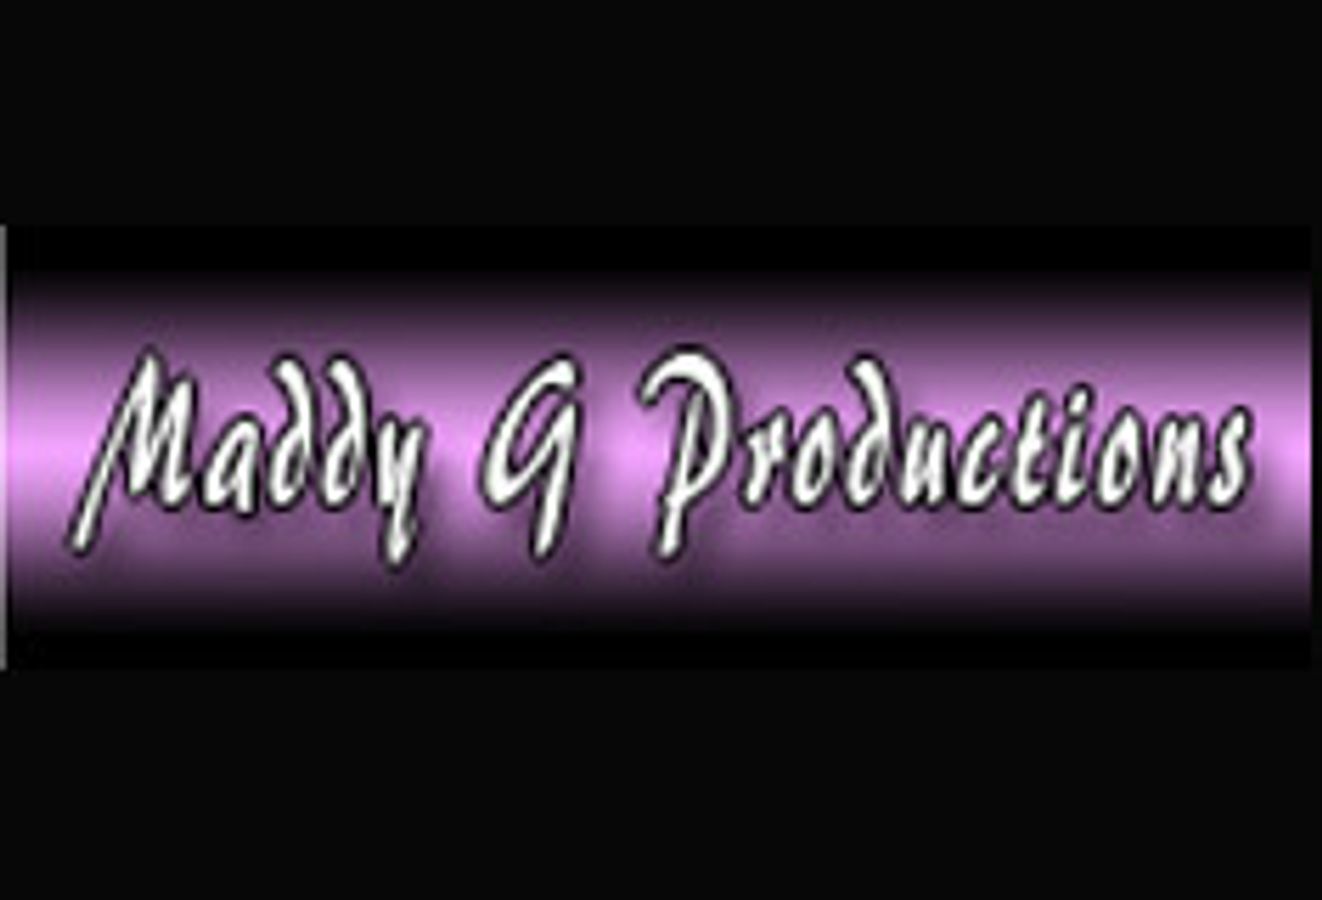 Maddy G Productions